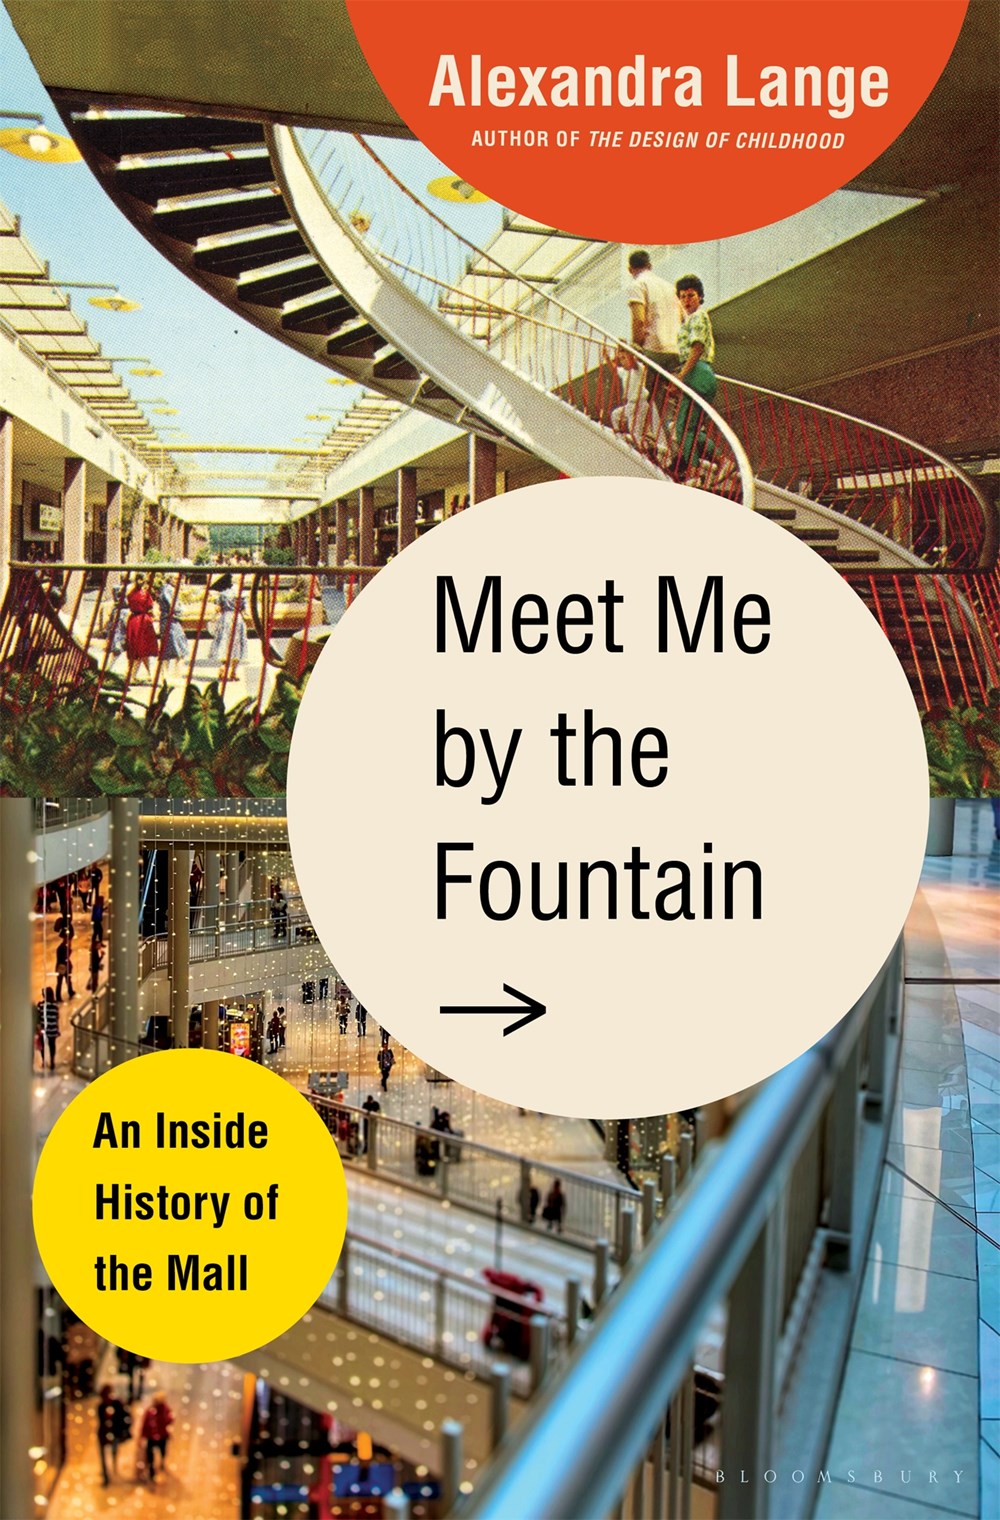 Image of "Meet Me by the Fountain: An Inside History of the Mall"